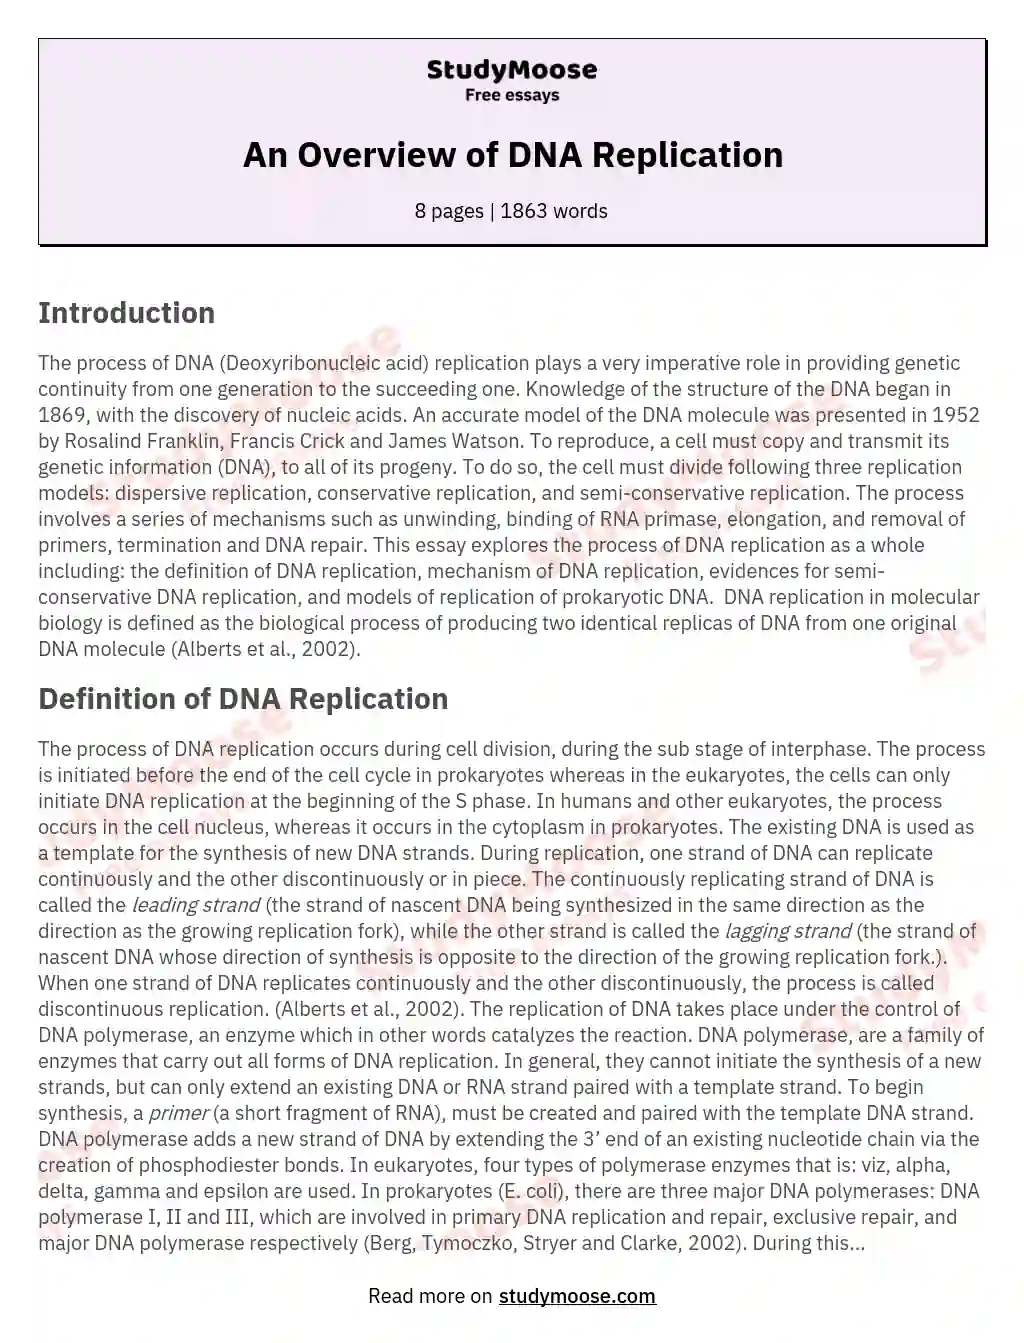 An Overview of DNA Replication essay